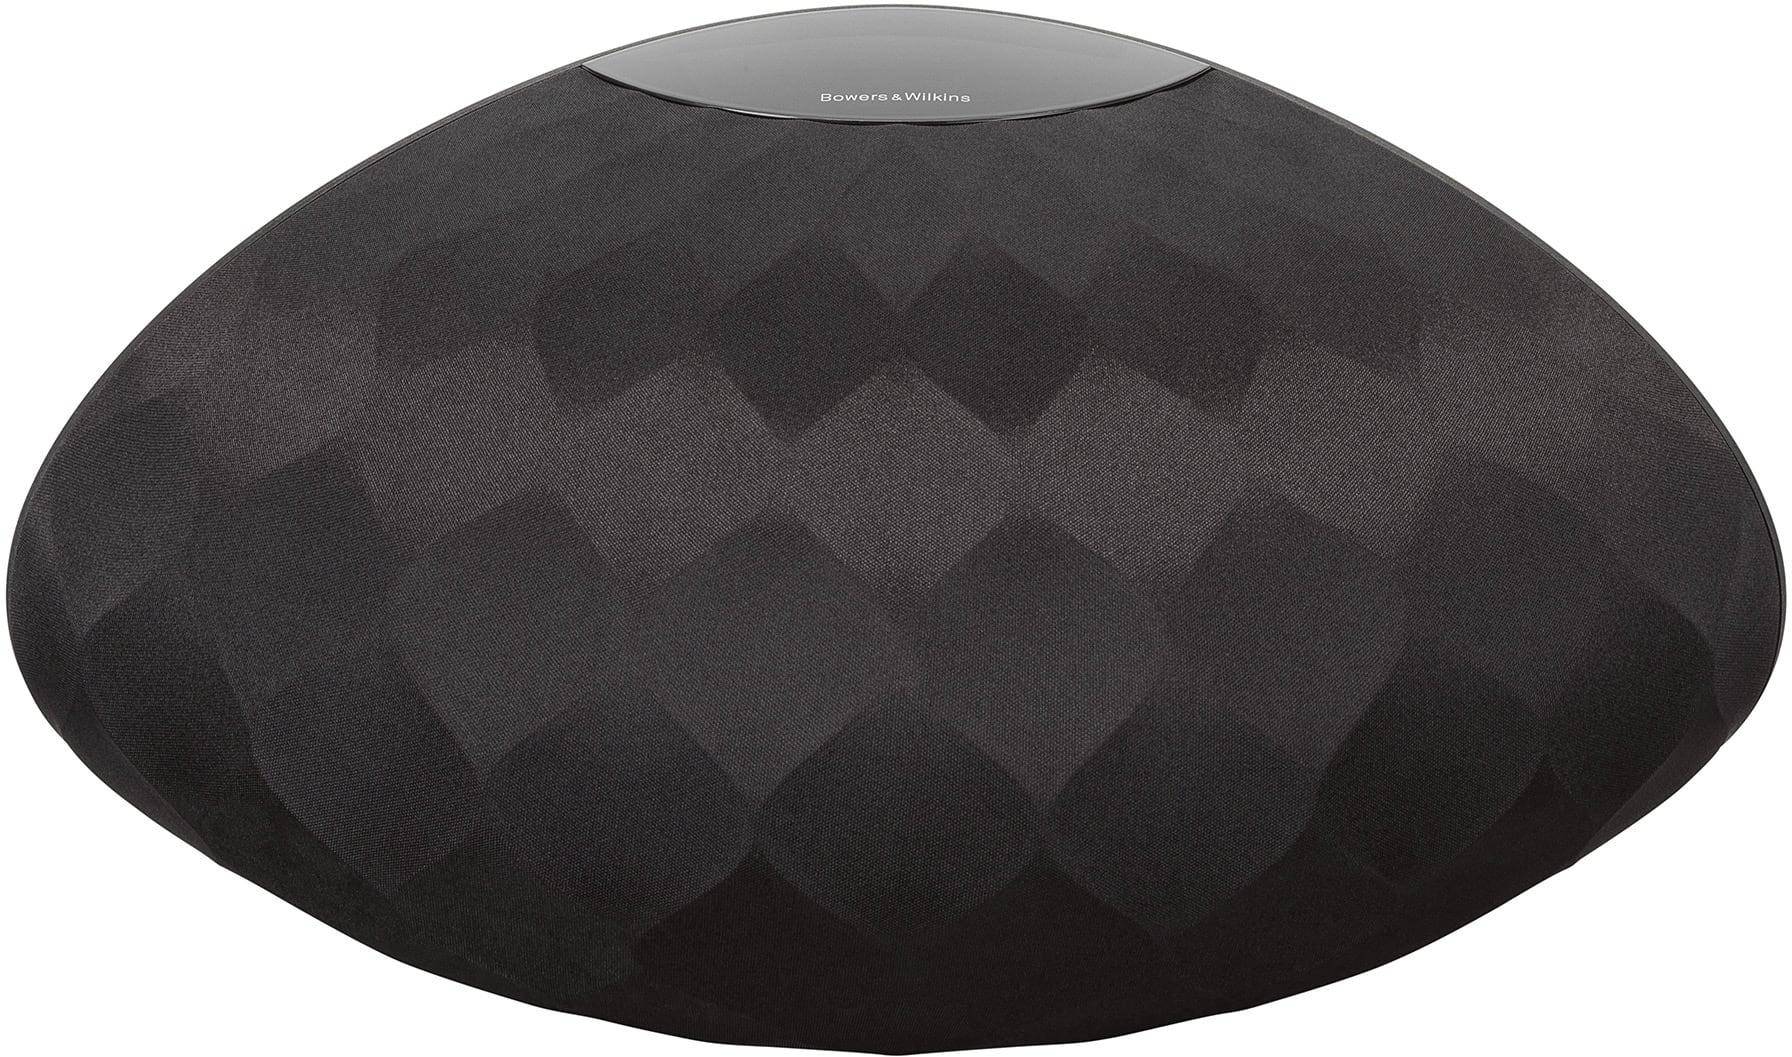 Bowers & Wilkins Formation Wedge Wireless Sound System zoom image